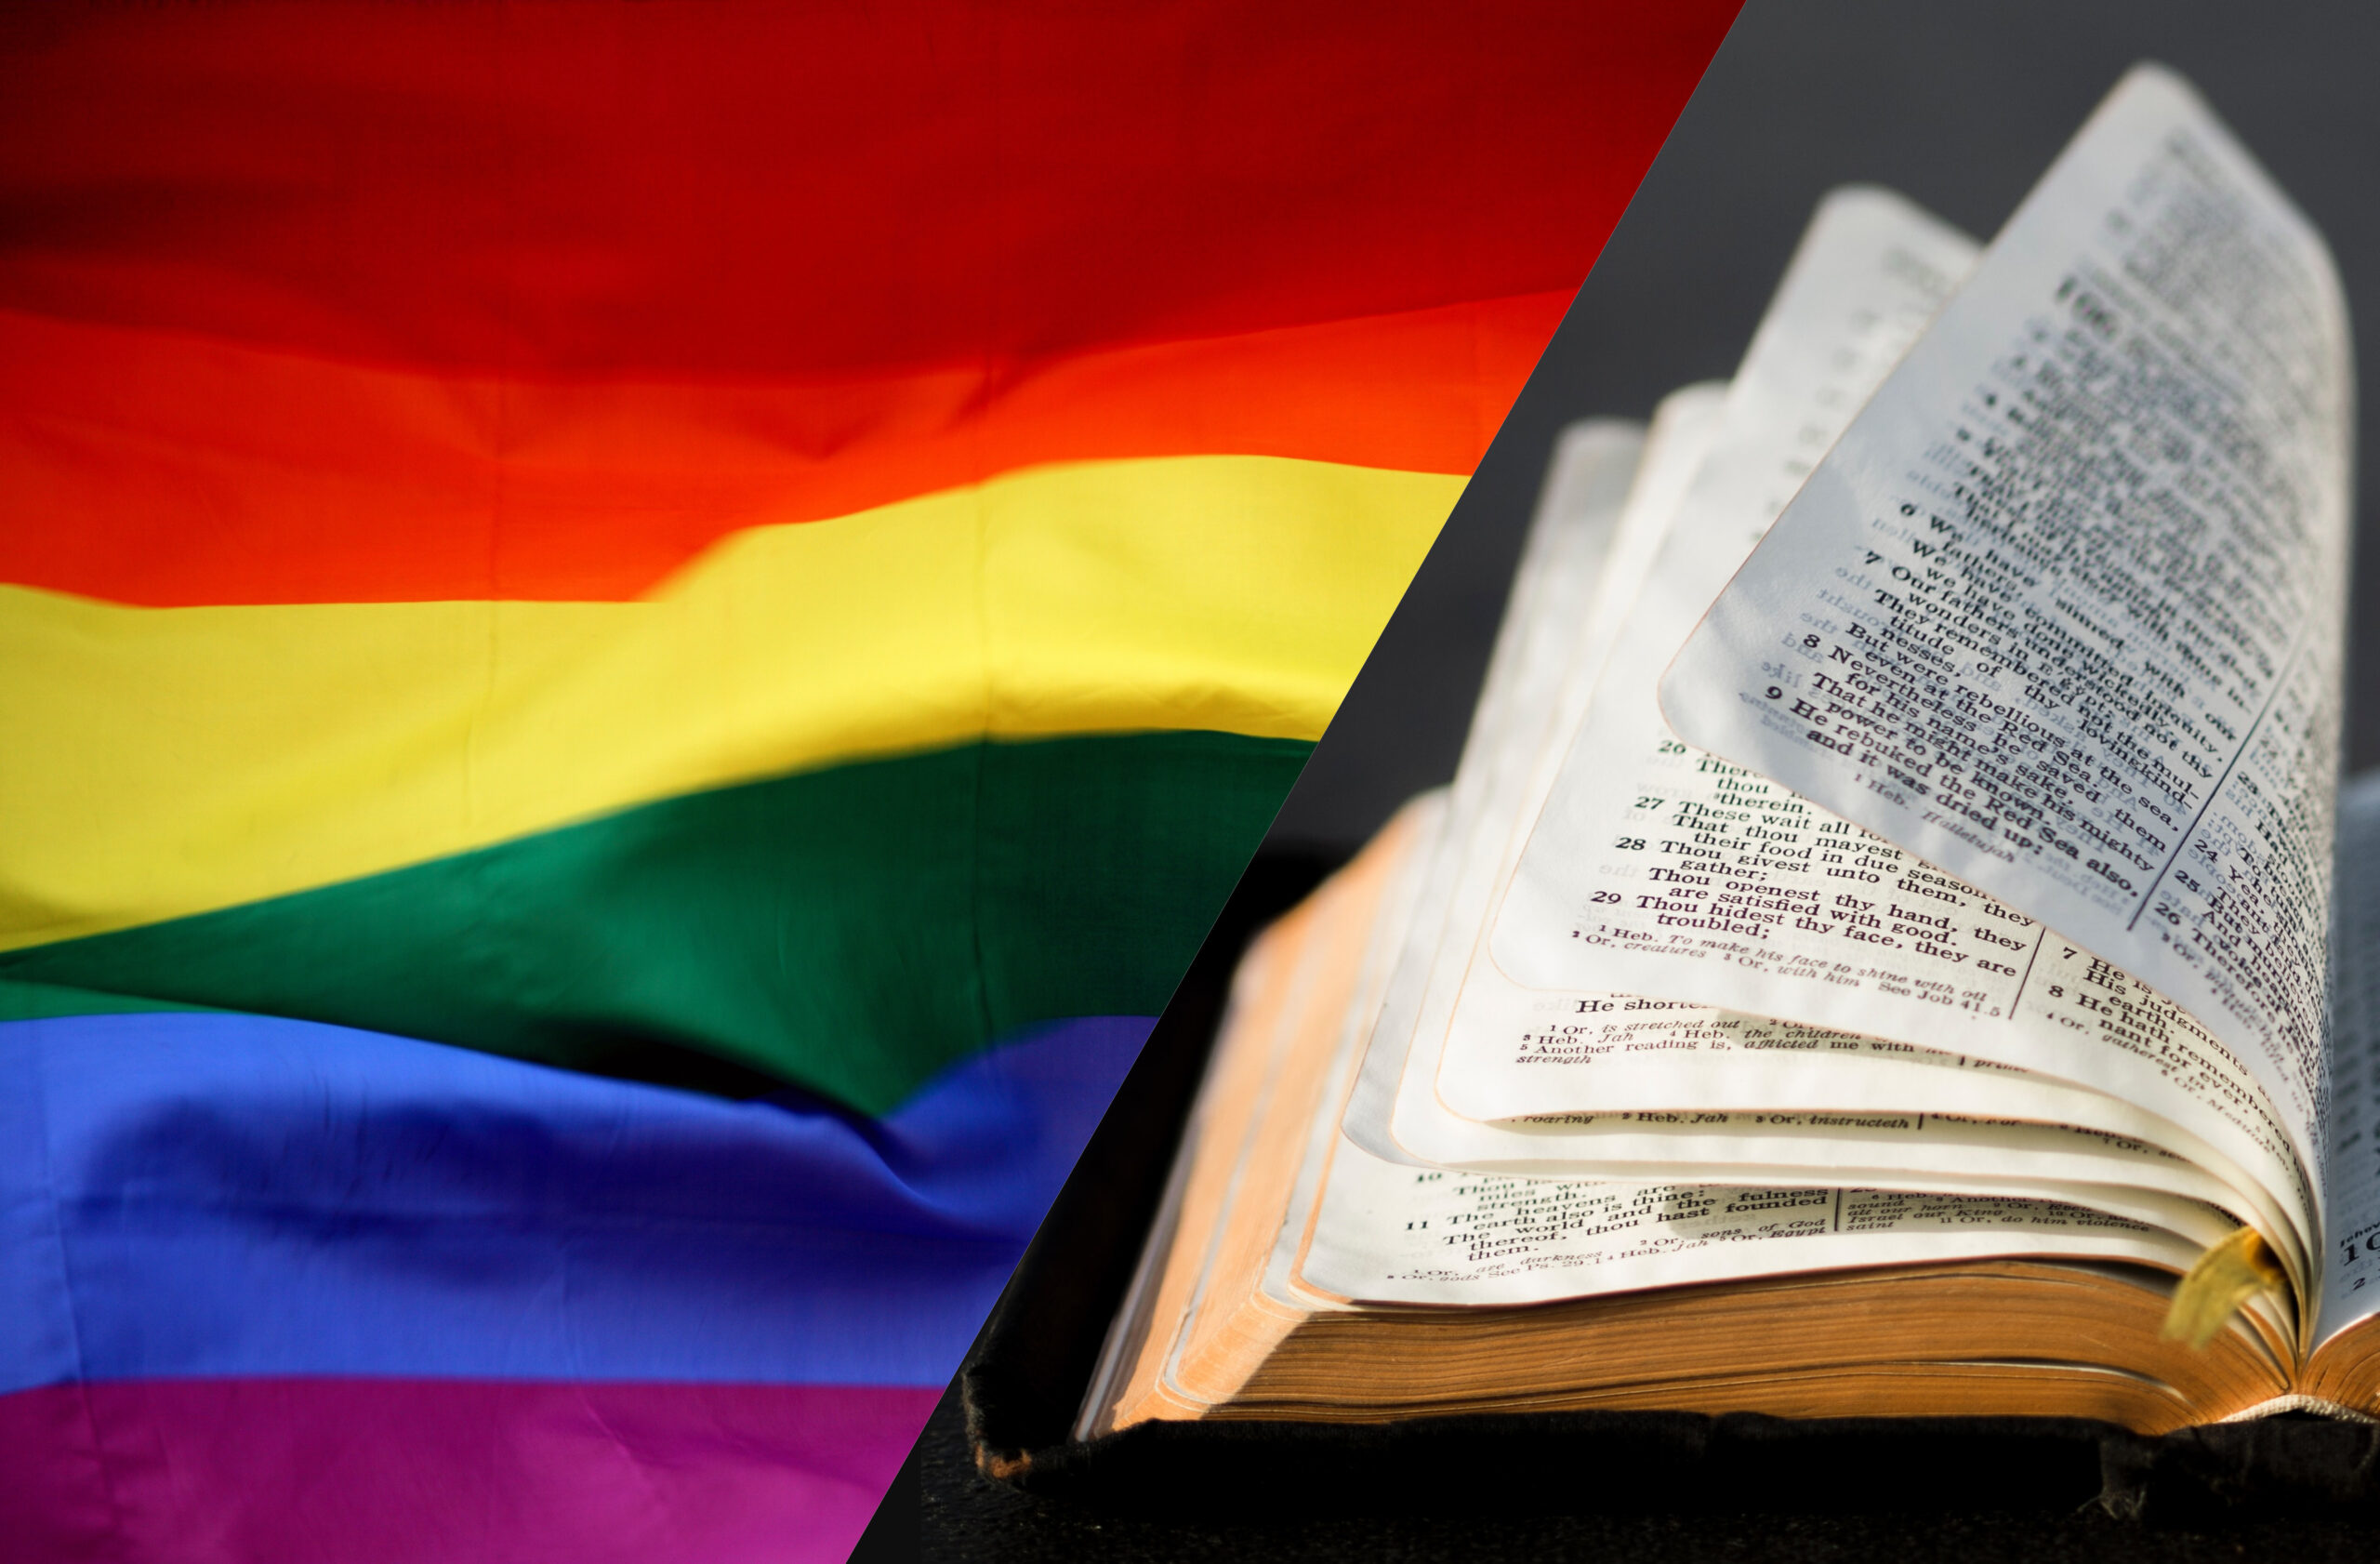 A composite image of a gay pride flag and a bible, open to somewhere in the middle